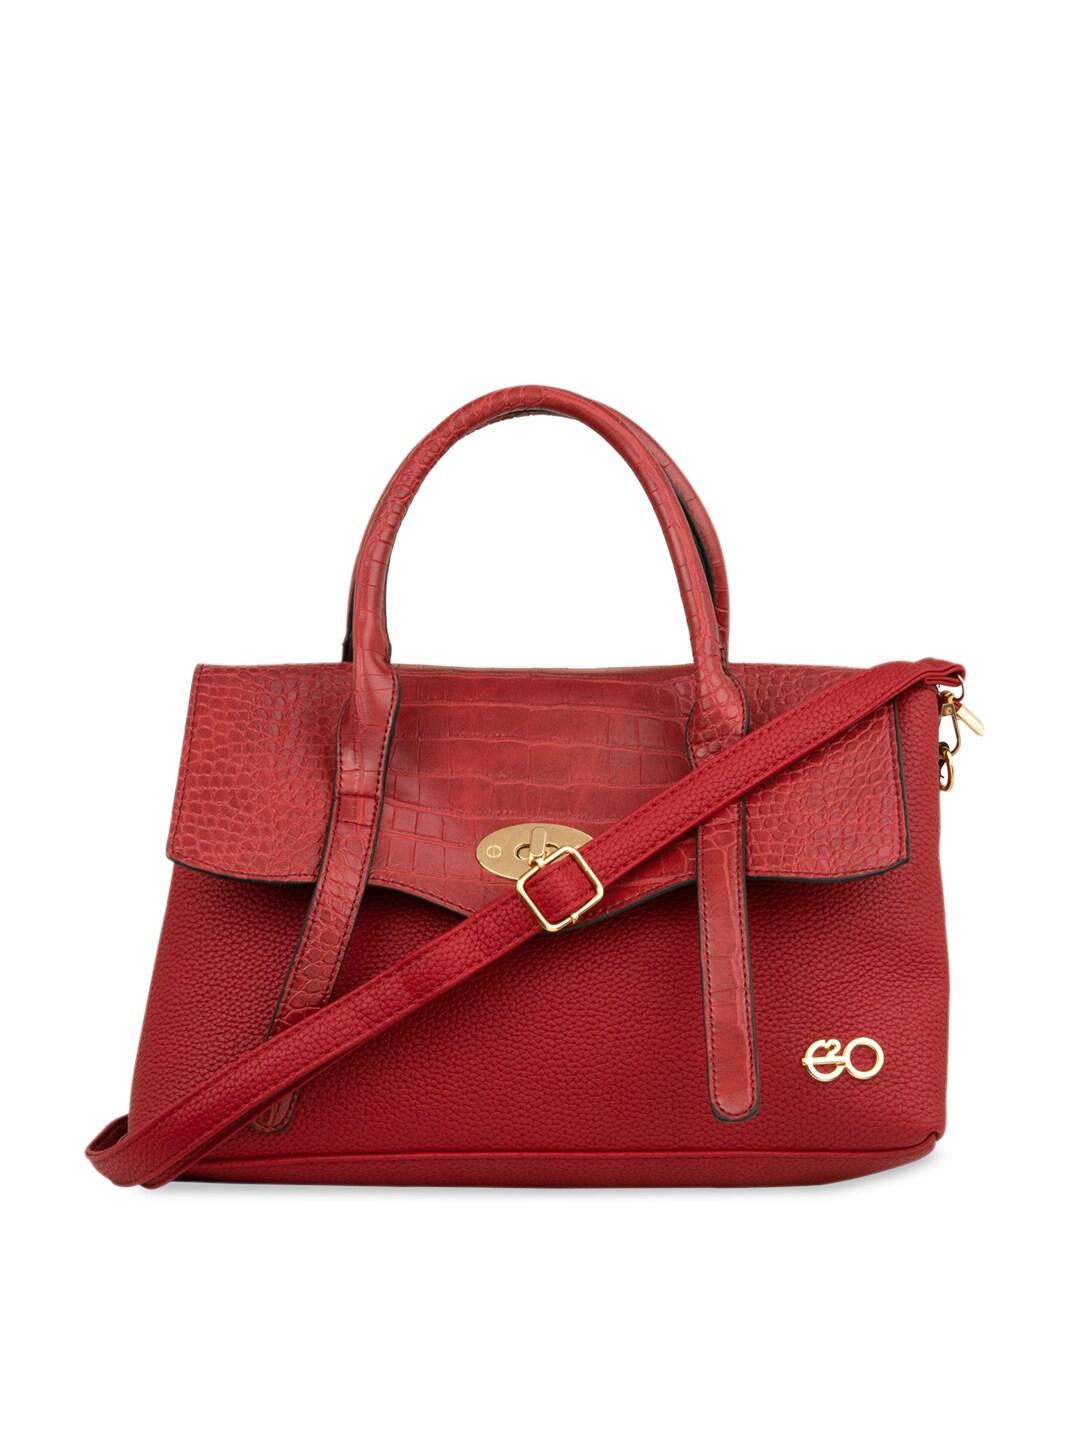 E2O Red Croc Textured Structured Handbags